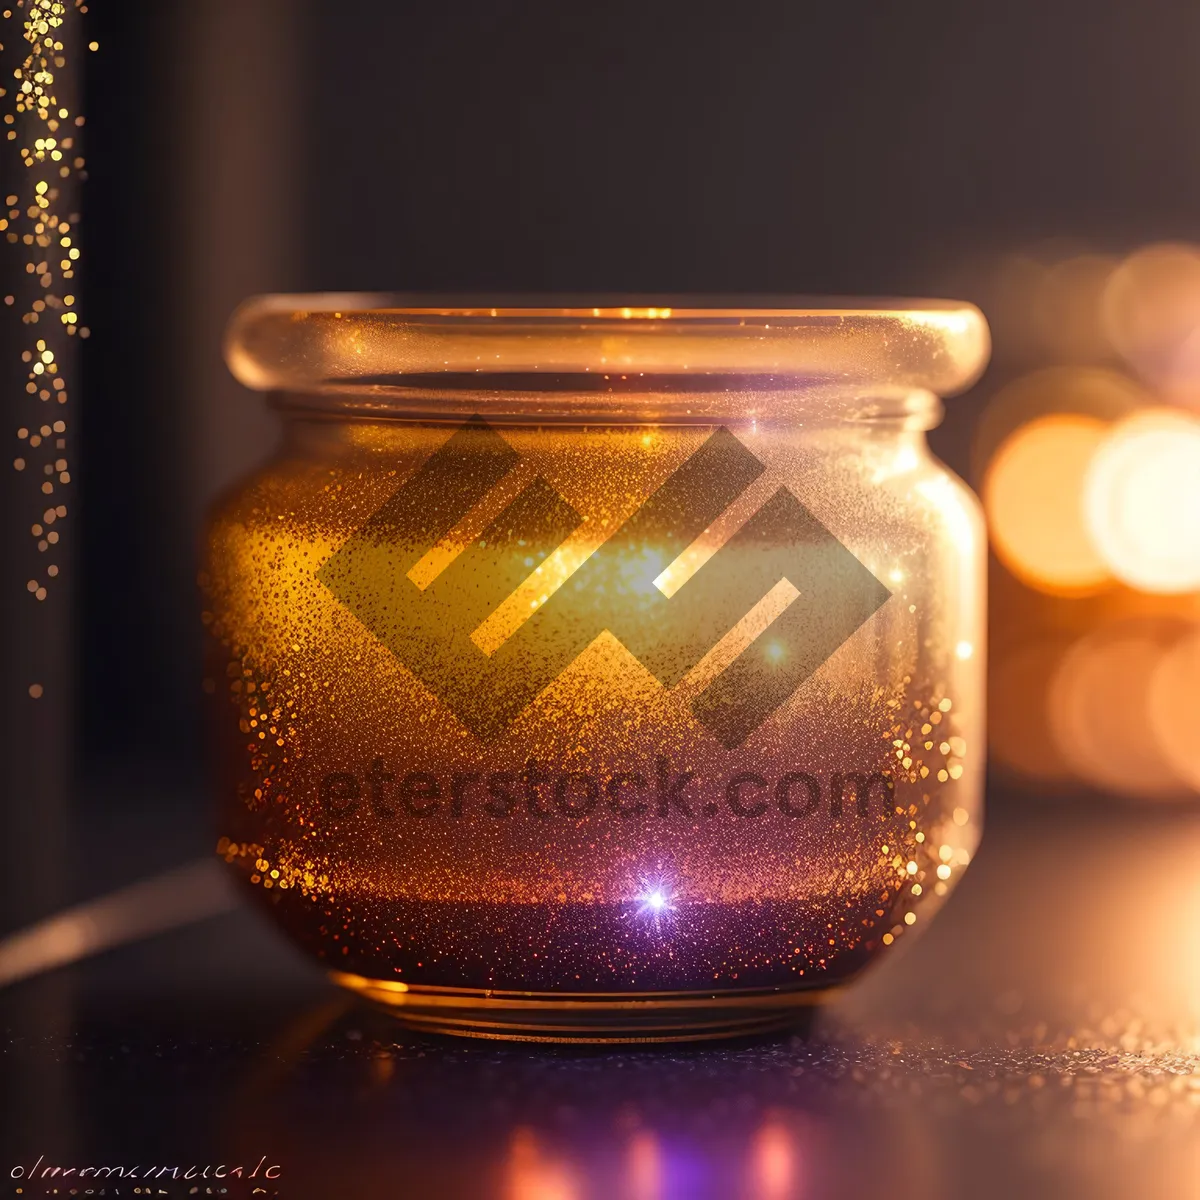 Picture of Tea-filled Glass Cup with Honey Splash